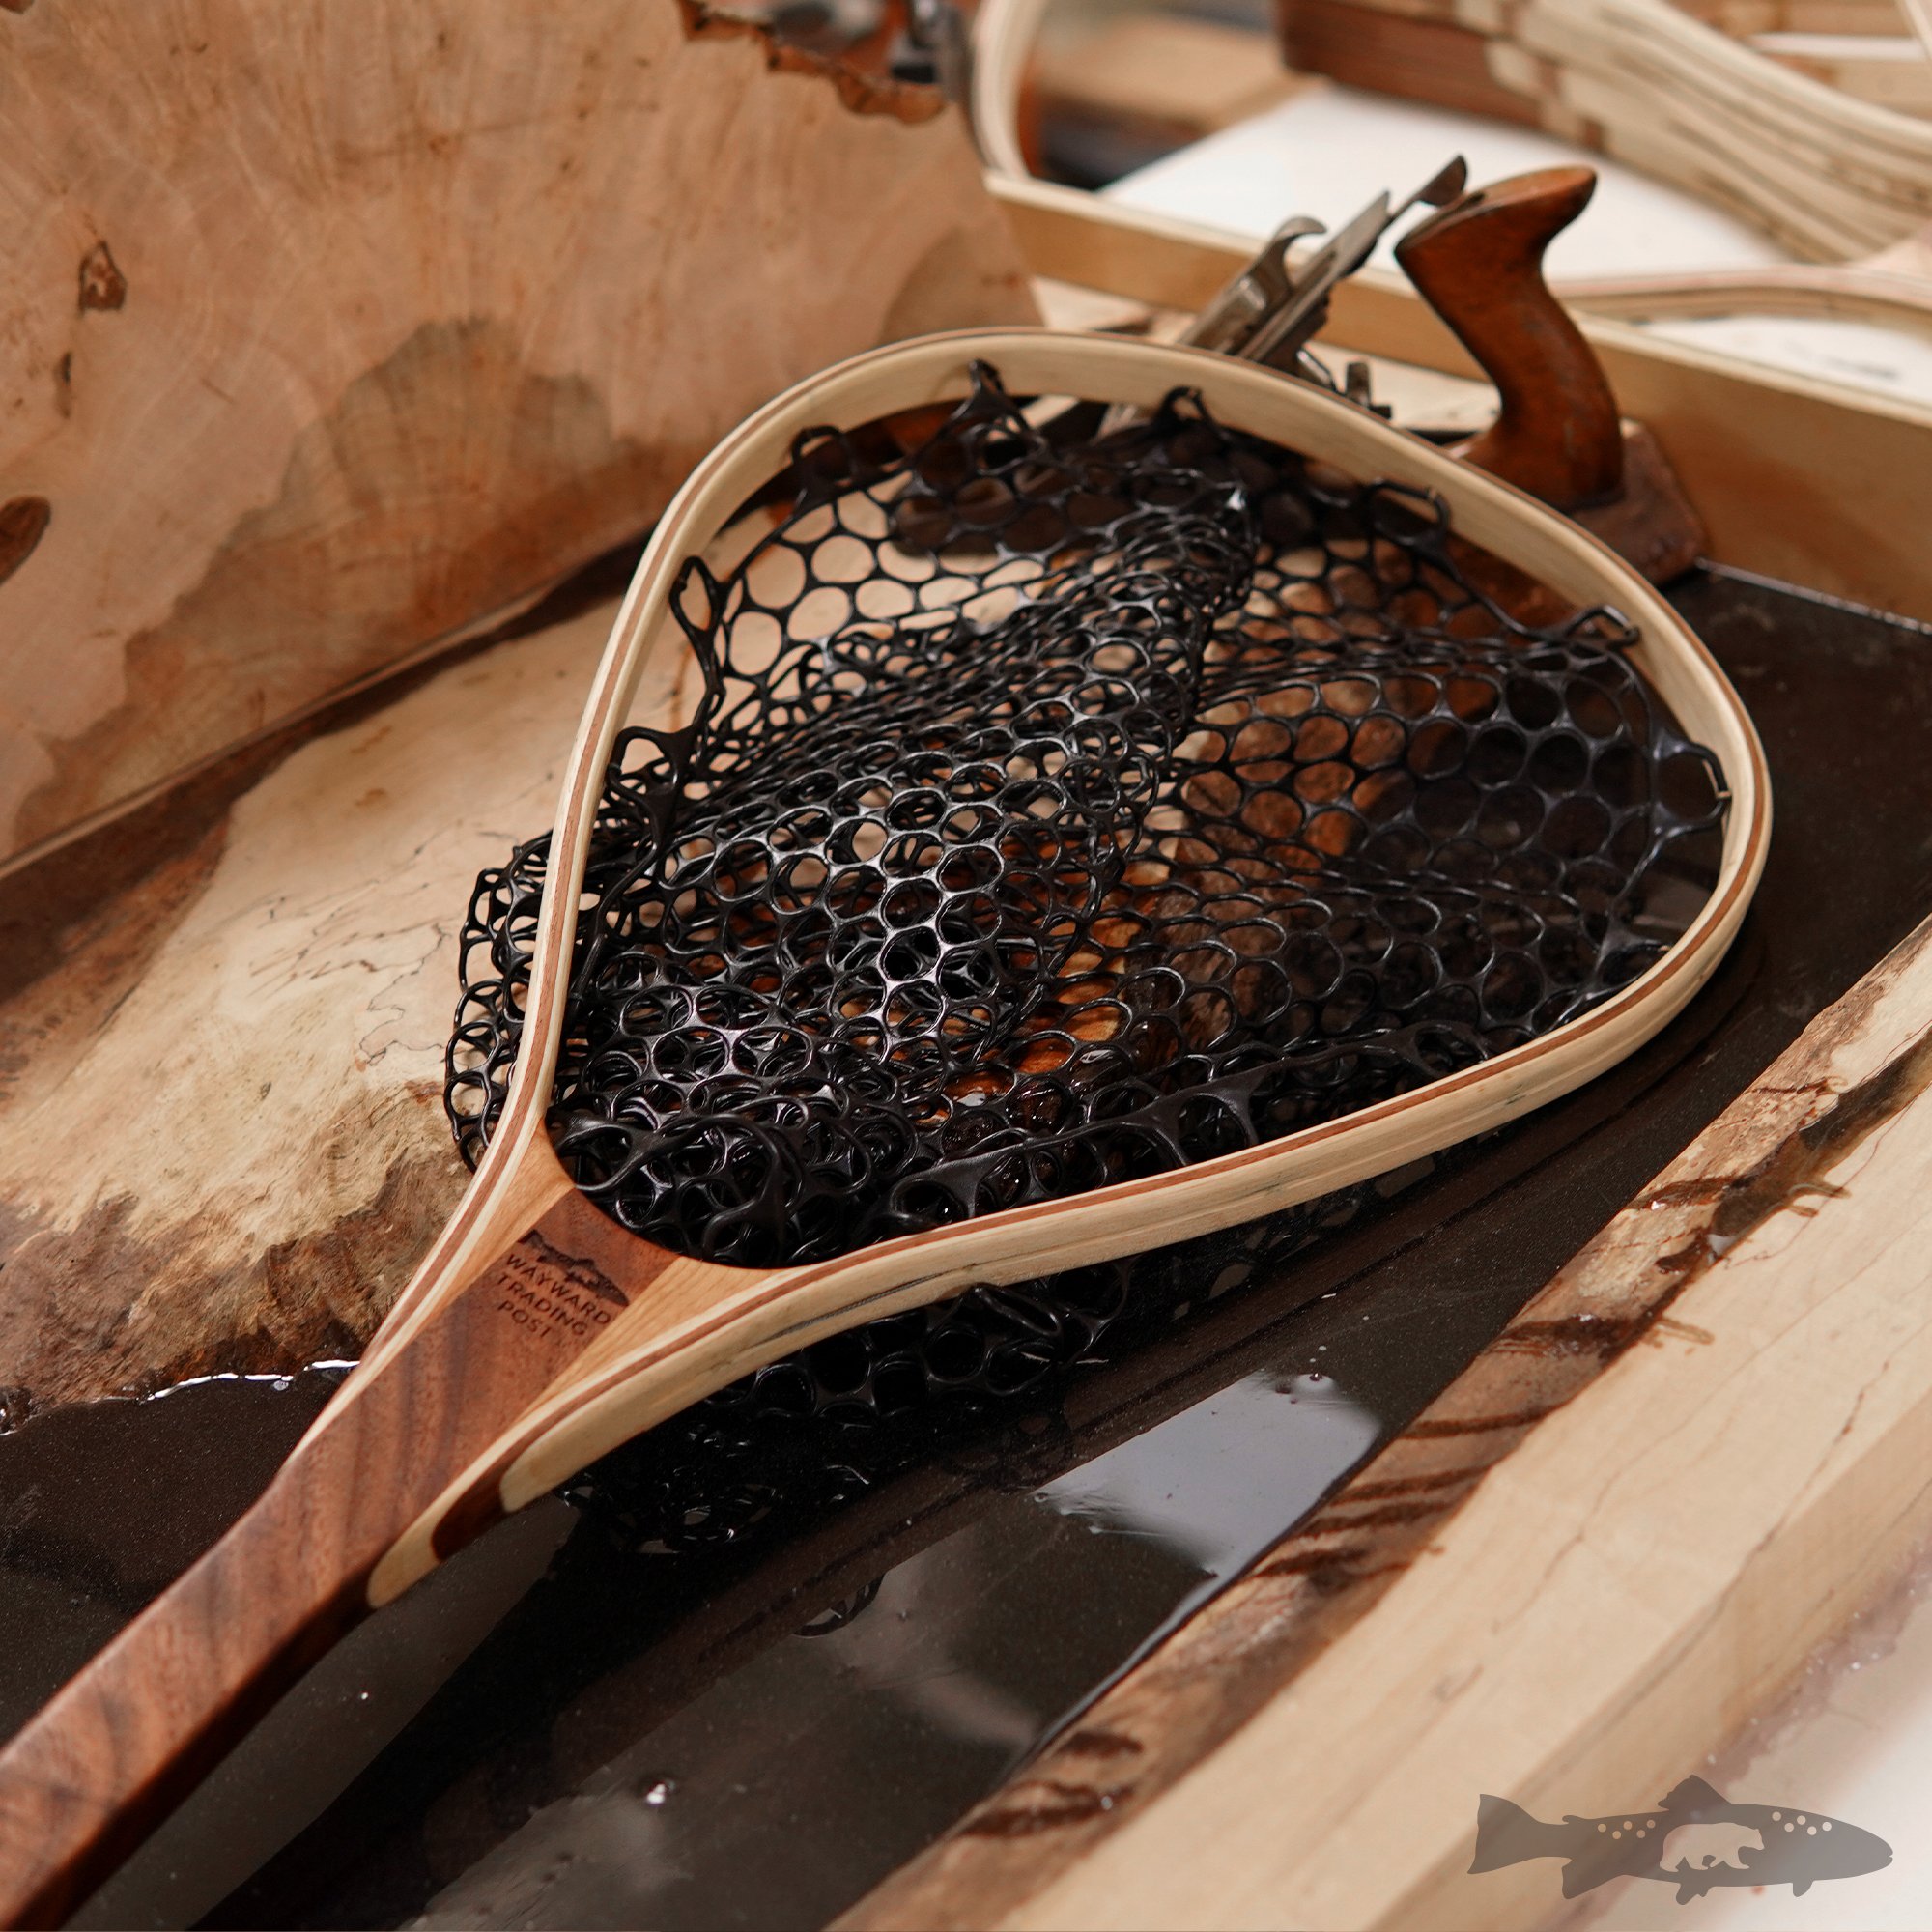 Classic Handcrafted Wood Landing Nets for Trout Fishing and Fly Fishing —  Wayward Handcrafted Fly Fishing Gear - made in Philadelphia USAWood Fly Fishing  net - Handcrafted Custom Fly Fishing net made